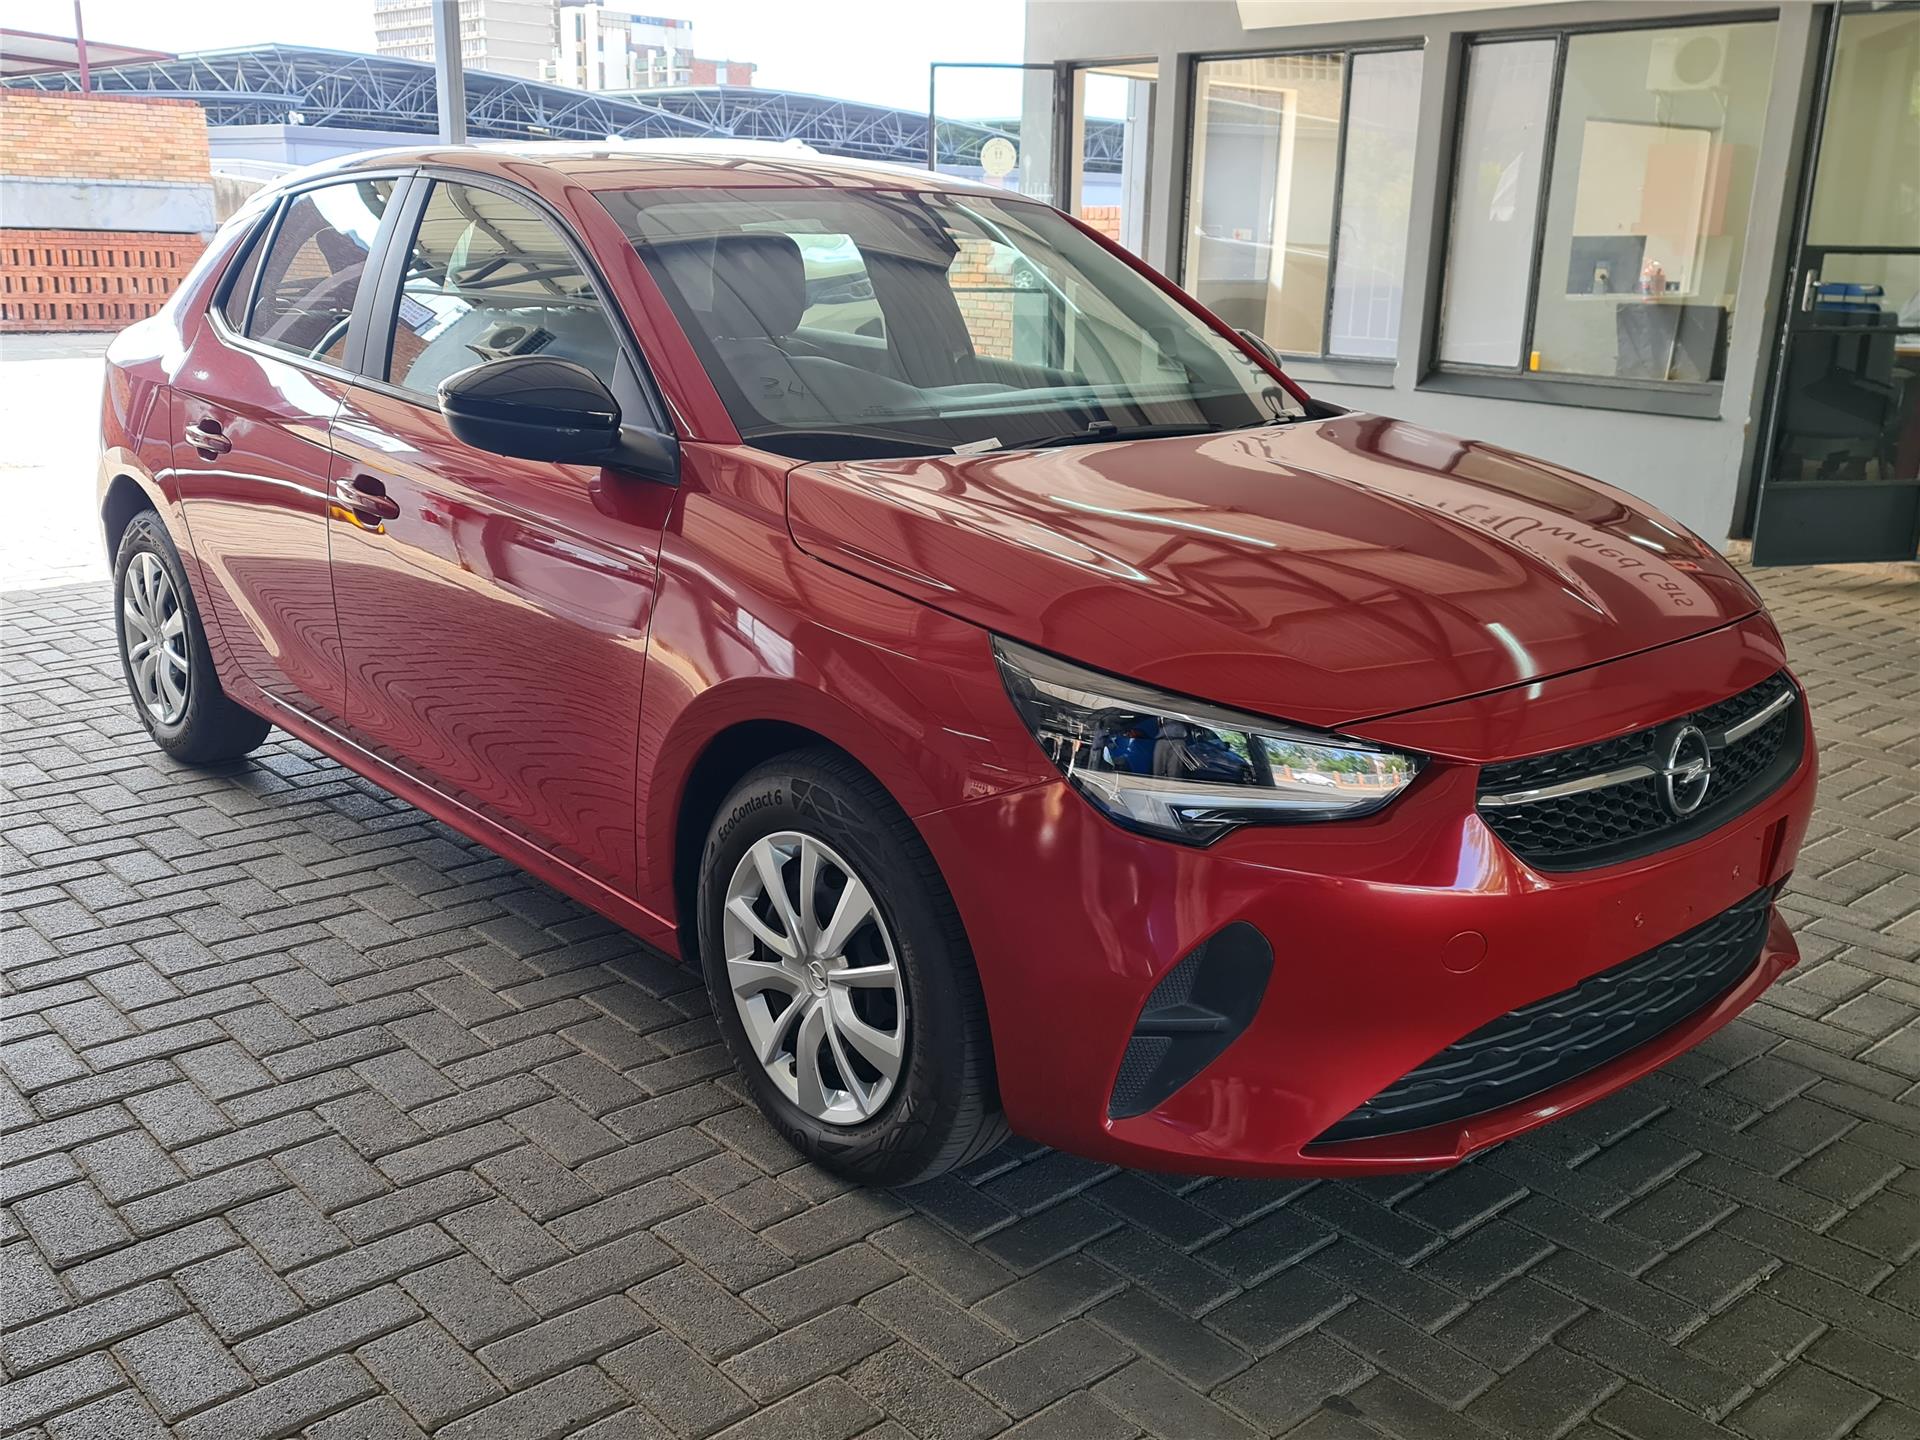 Used 2018 Opel Cars for Sale in Limpopo, South Africa